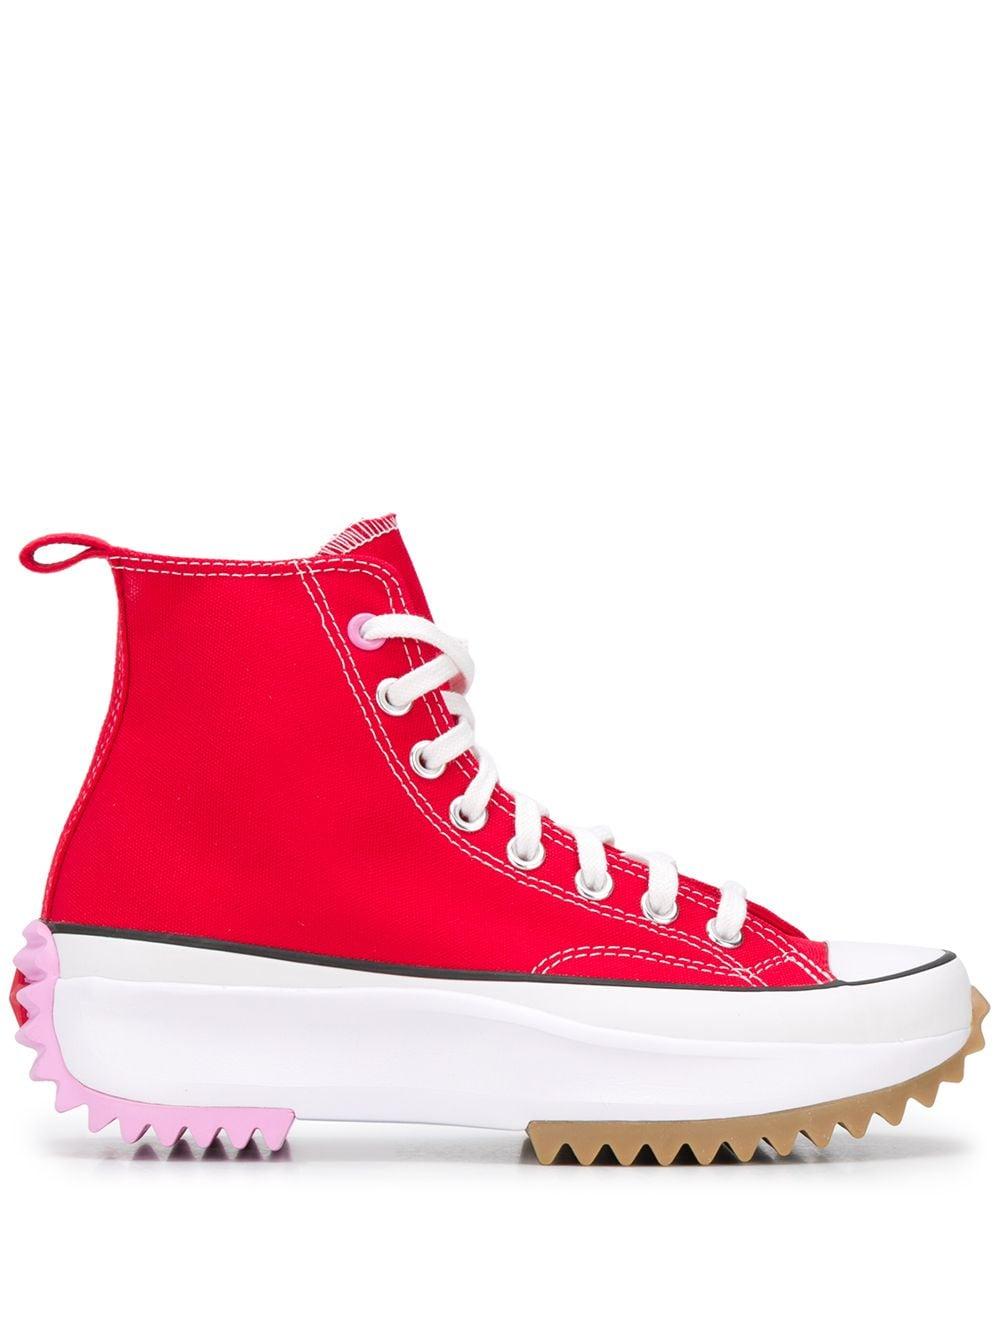 Converse Lace Run Star Hike High-top Trainers in Red for Men - Lyst